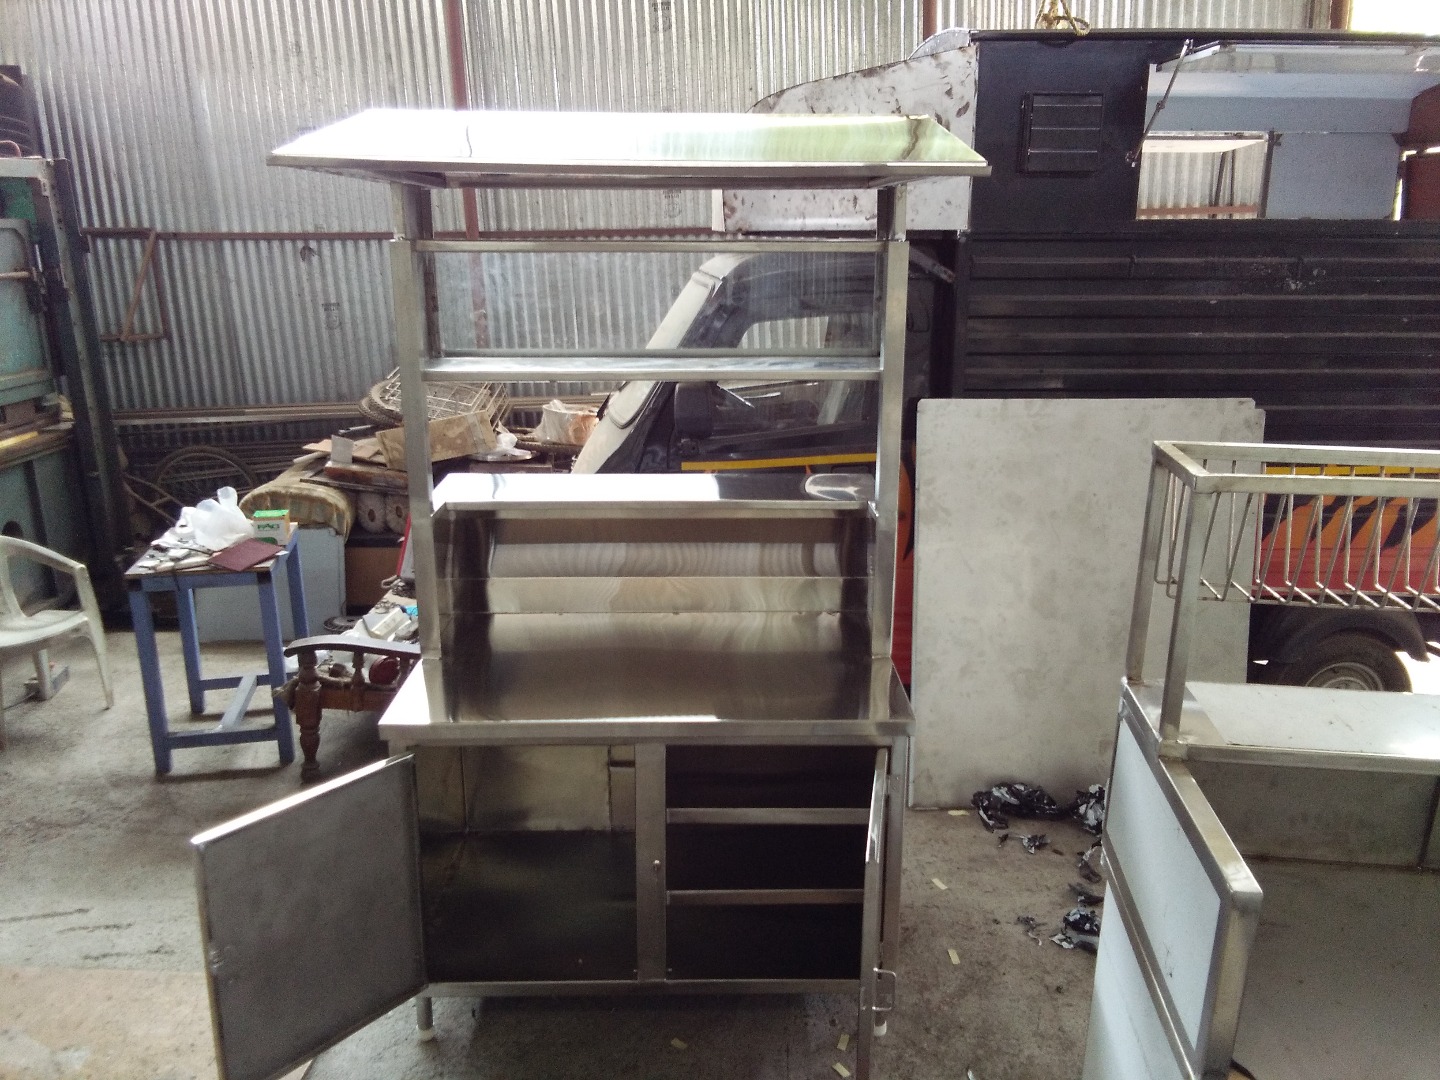 FAST FOOD COUNTER MANUFACTURERS  | Fort Enterprises | FAST FOOD COUNTER IN PUNE, FAST FOOD COUNTER MANUFACTURERS IN PUNE, FAST FOOD COUNTERS IN PUNE, FAST FOOD COUNTER DEALERS IN PUNE, FAST FOOD COUNTERS IN PUNE, SS STEEL COUNTER IN PUNE, MANUFACTURERS. - GL22177